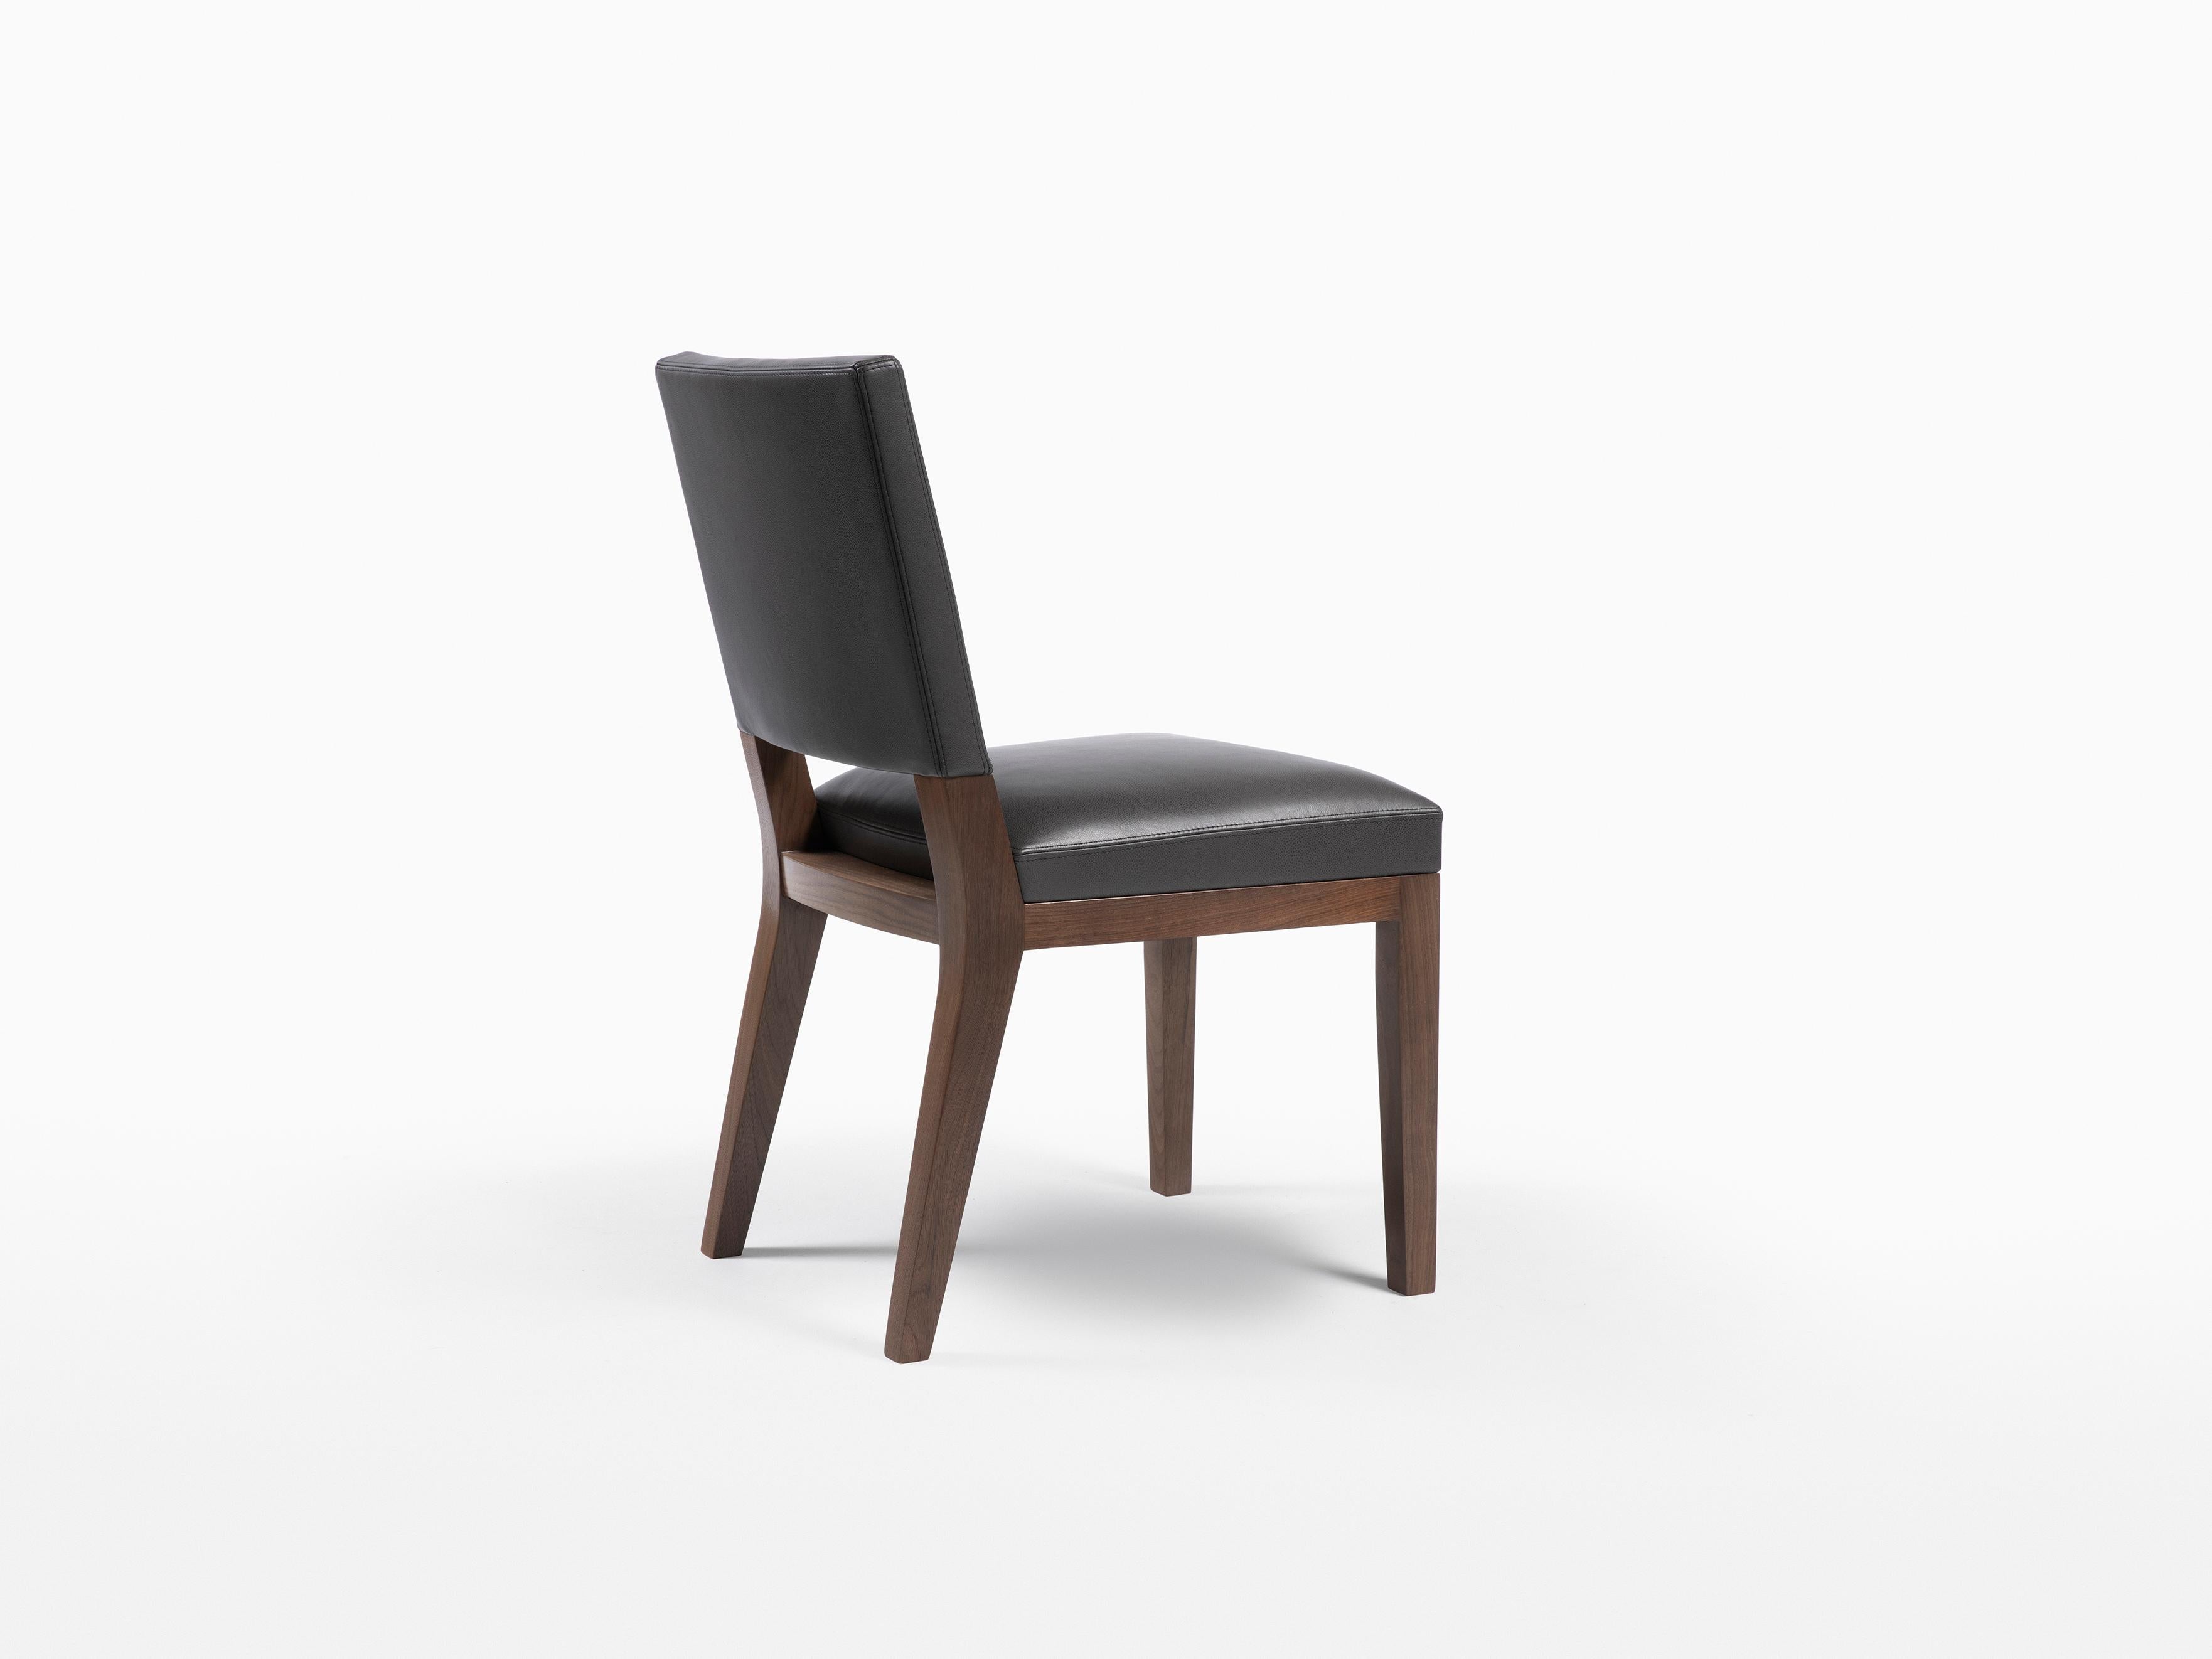 HOLLY HUNT Luna dining chair in walnut dusk finish with upholstered seat. At the top of its class in finish and construction, this chair is the quintessential side chair design. Easily suited for any style dining table, this chair is made up of